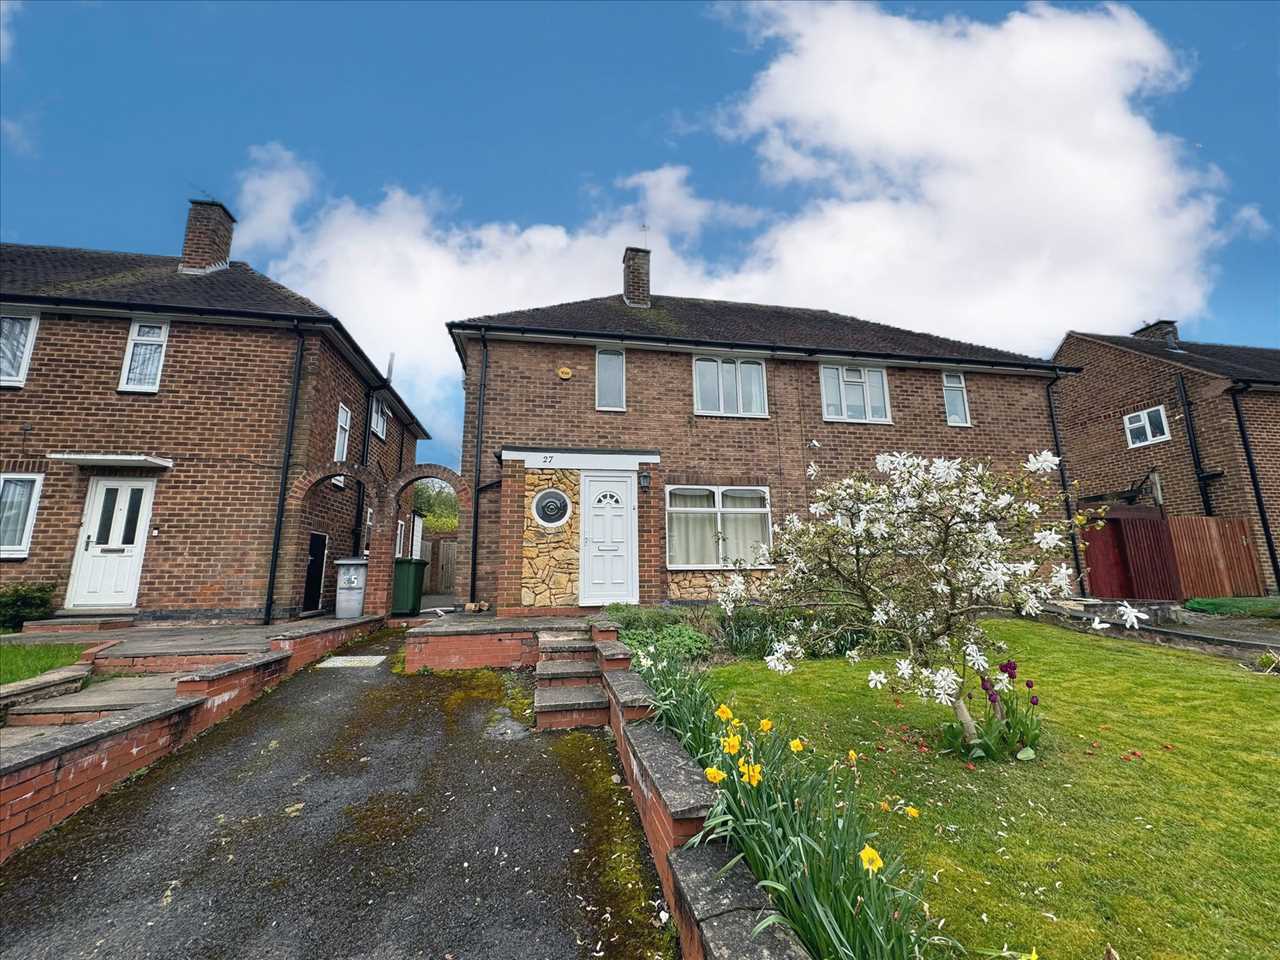 3 bed Semi-Detached House for rent in Solihull. From Partridge Homes - Yardley